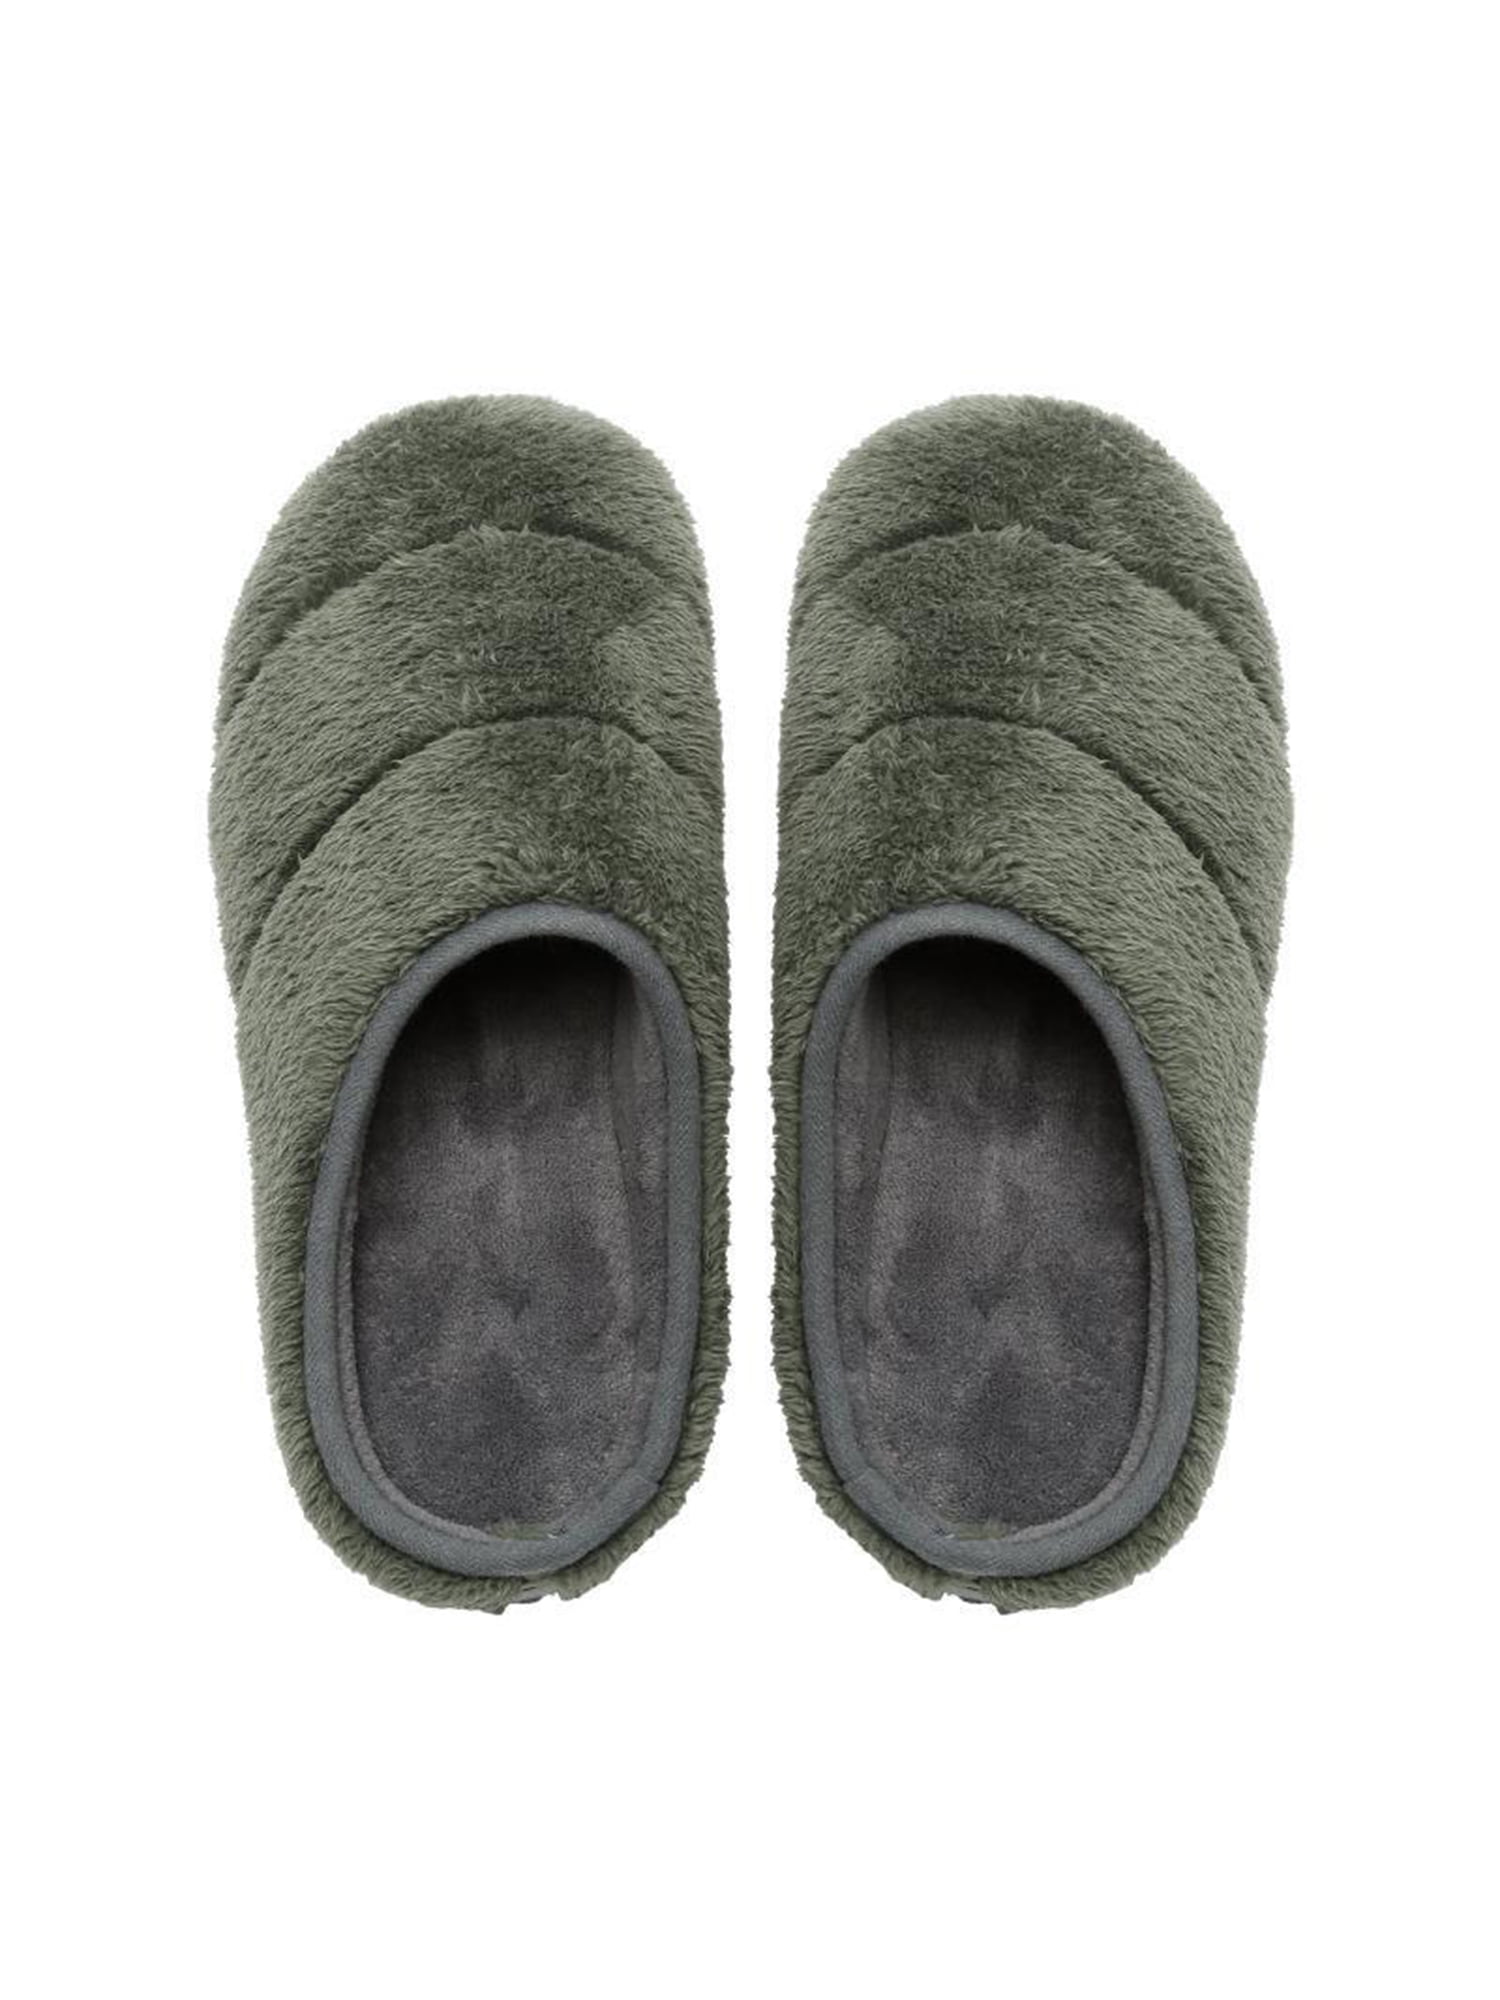 Unisex Breathable Non-slip Clog Slipper Closed Toe House Shoes Outdoor Solid Winter Warm Slippers Green - Walmart.com